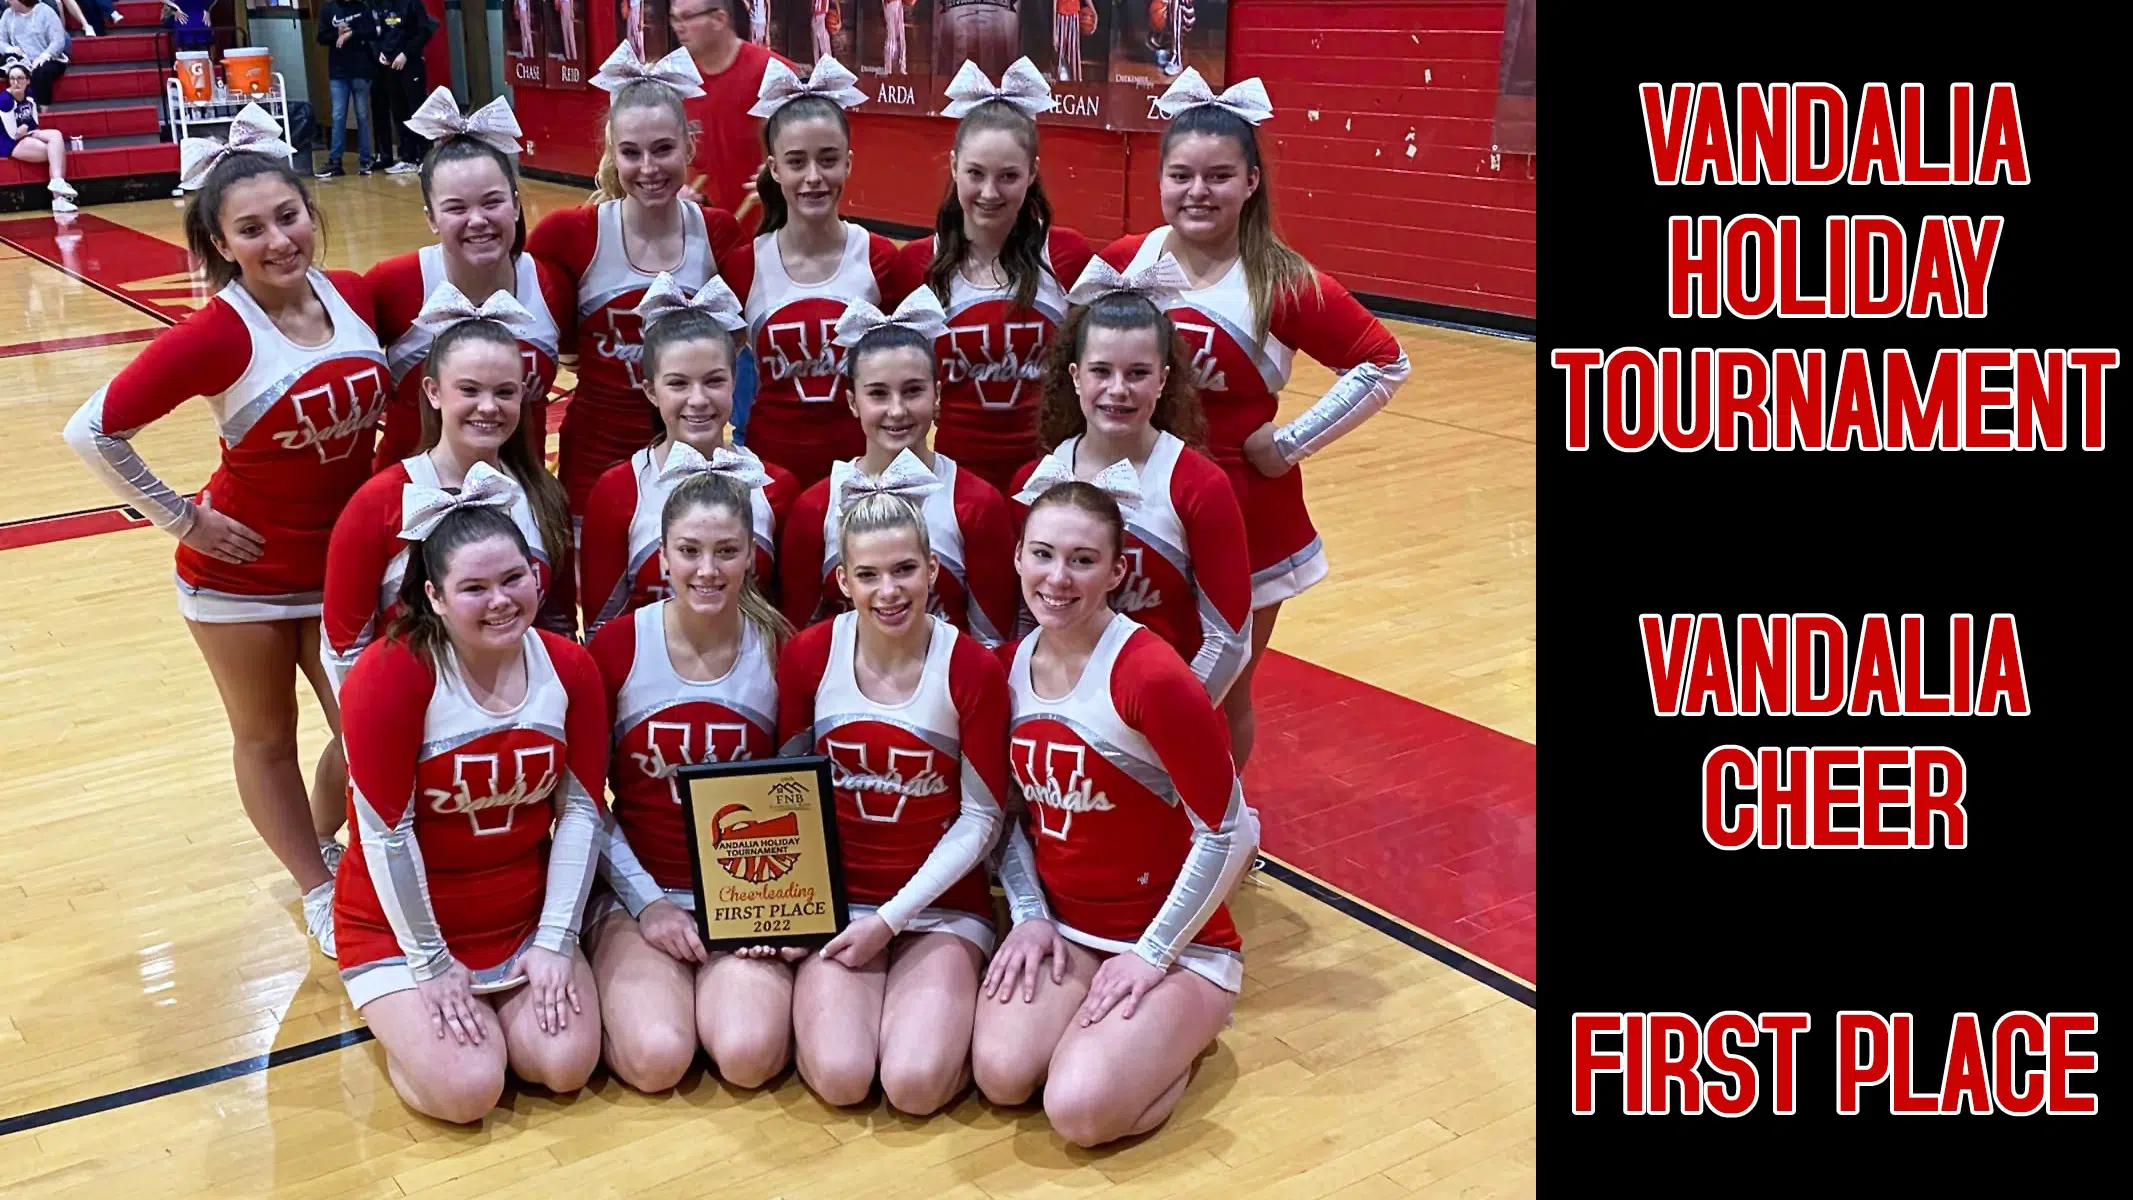 Vandalia Cheer Takes First Place in Vandalia Holiday Tournament Cheer